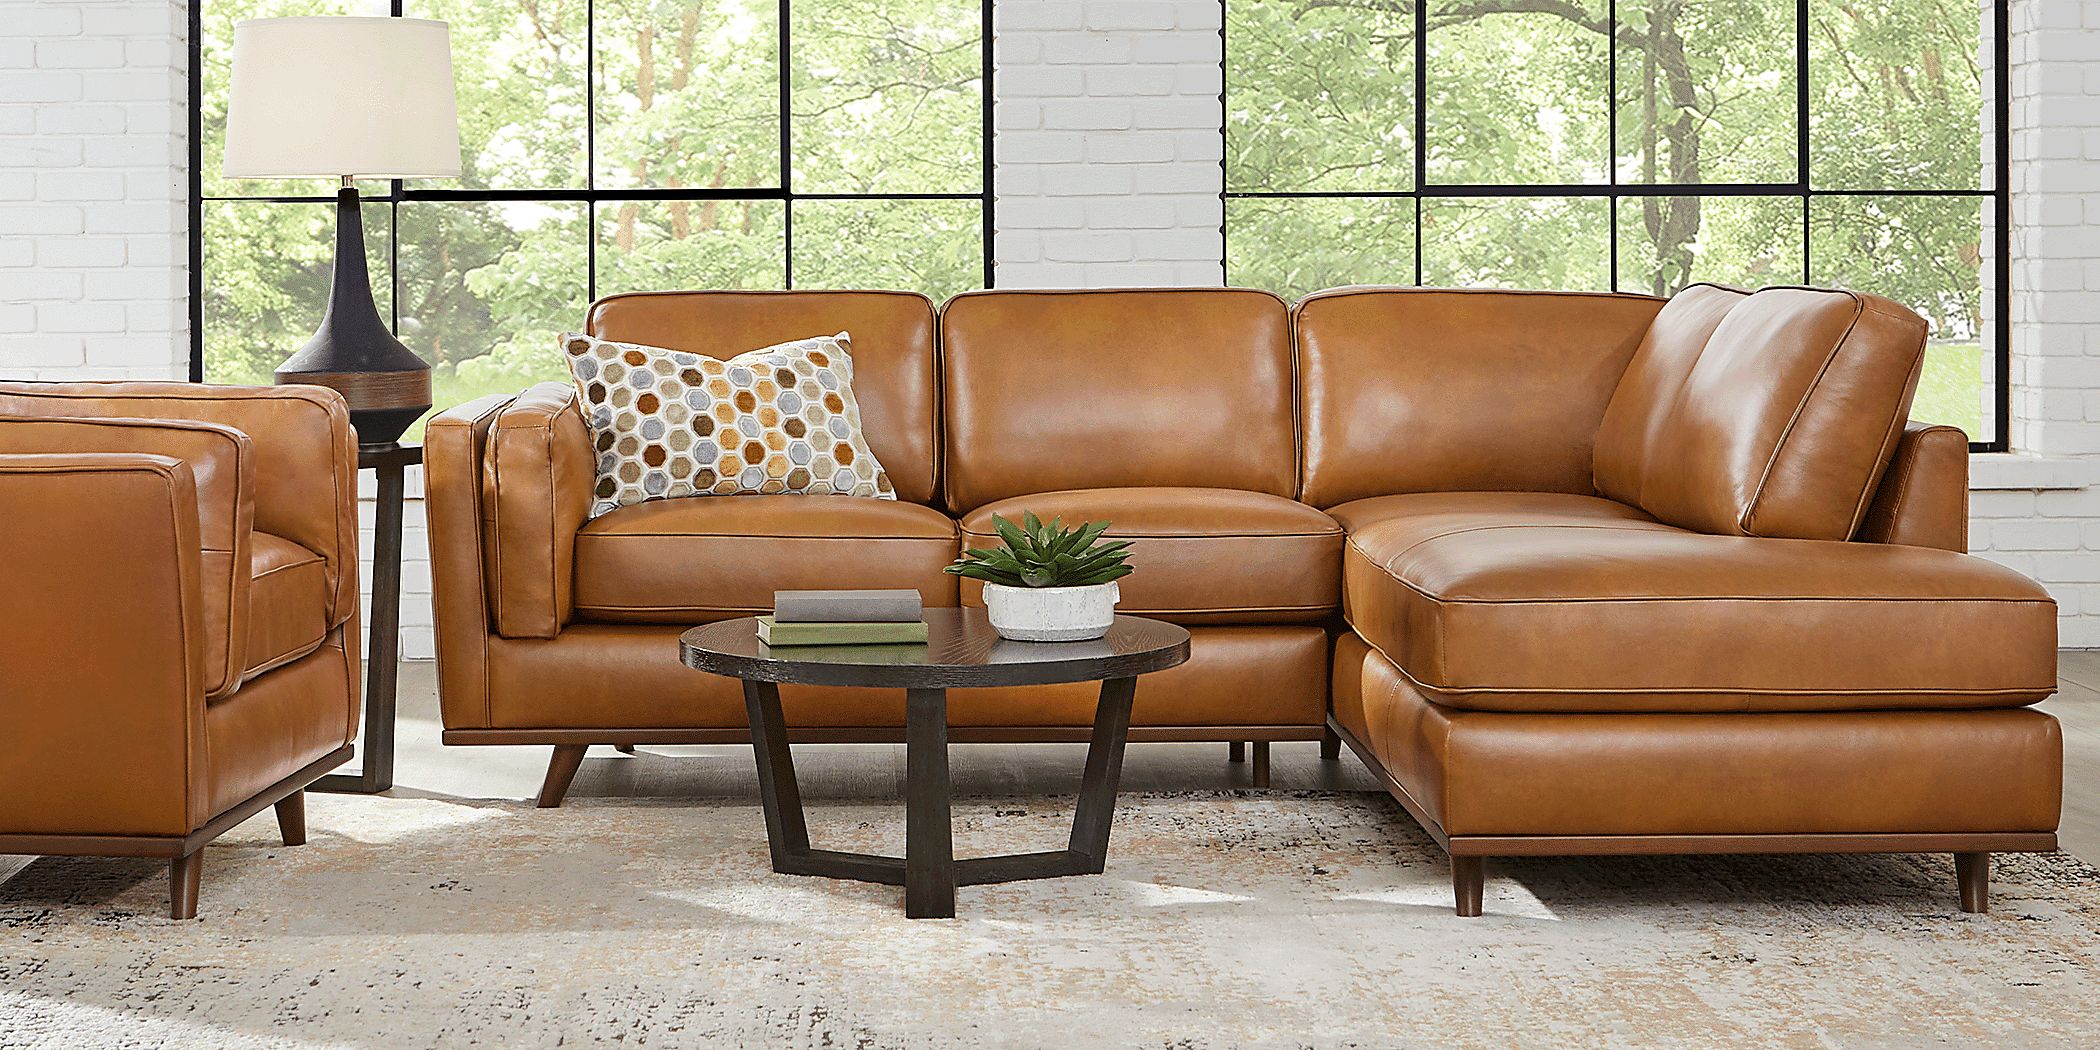 Duluth Caramel Leather 6 Pc Sectional Living Room